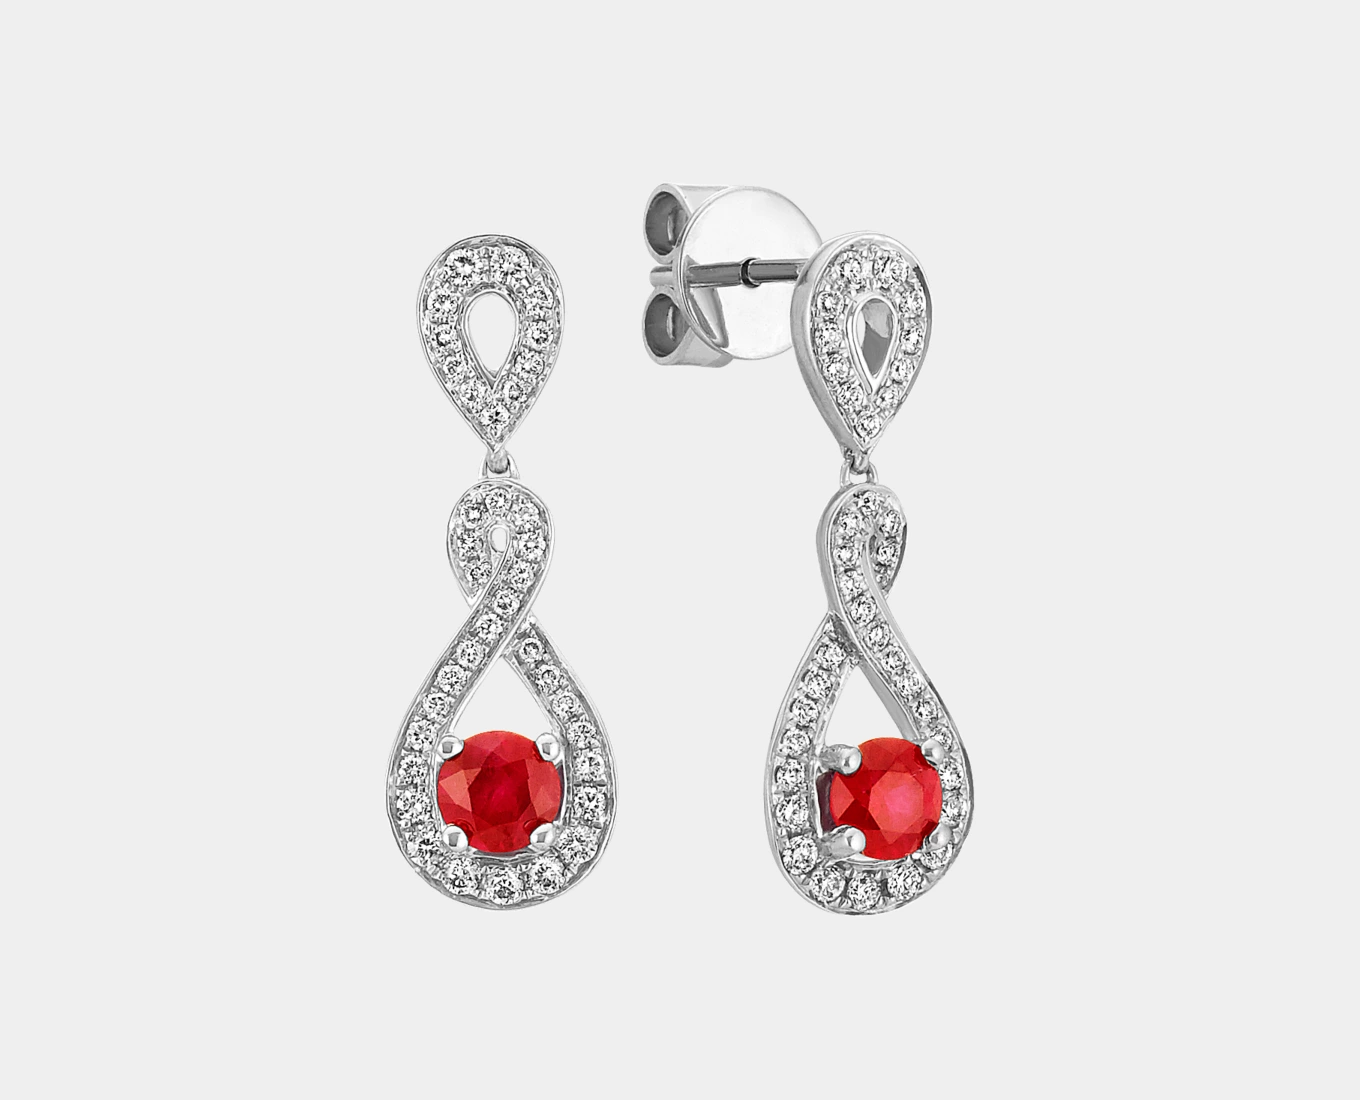 Ruby and Diamond Swirl Earrings
Seventy-four round natural diamonds (approx. .30 carat TW) highlight two round natural rubies (approx. .52 carat TW) in this swirl style. Crafted of quality 14 karat white gold, the elegant designs measure 7/8 of an inch long and are secured with friction posts and backs. The total gem weight is approximately .82 carat.